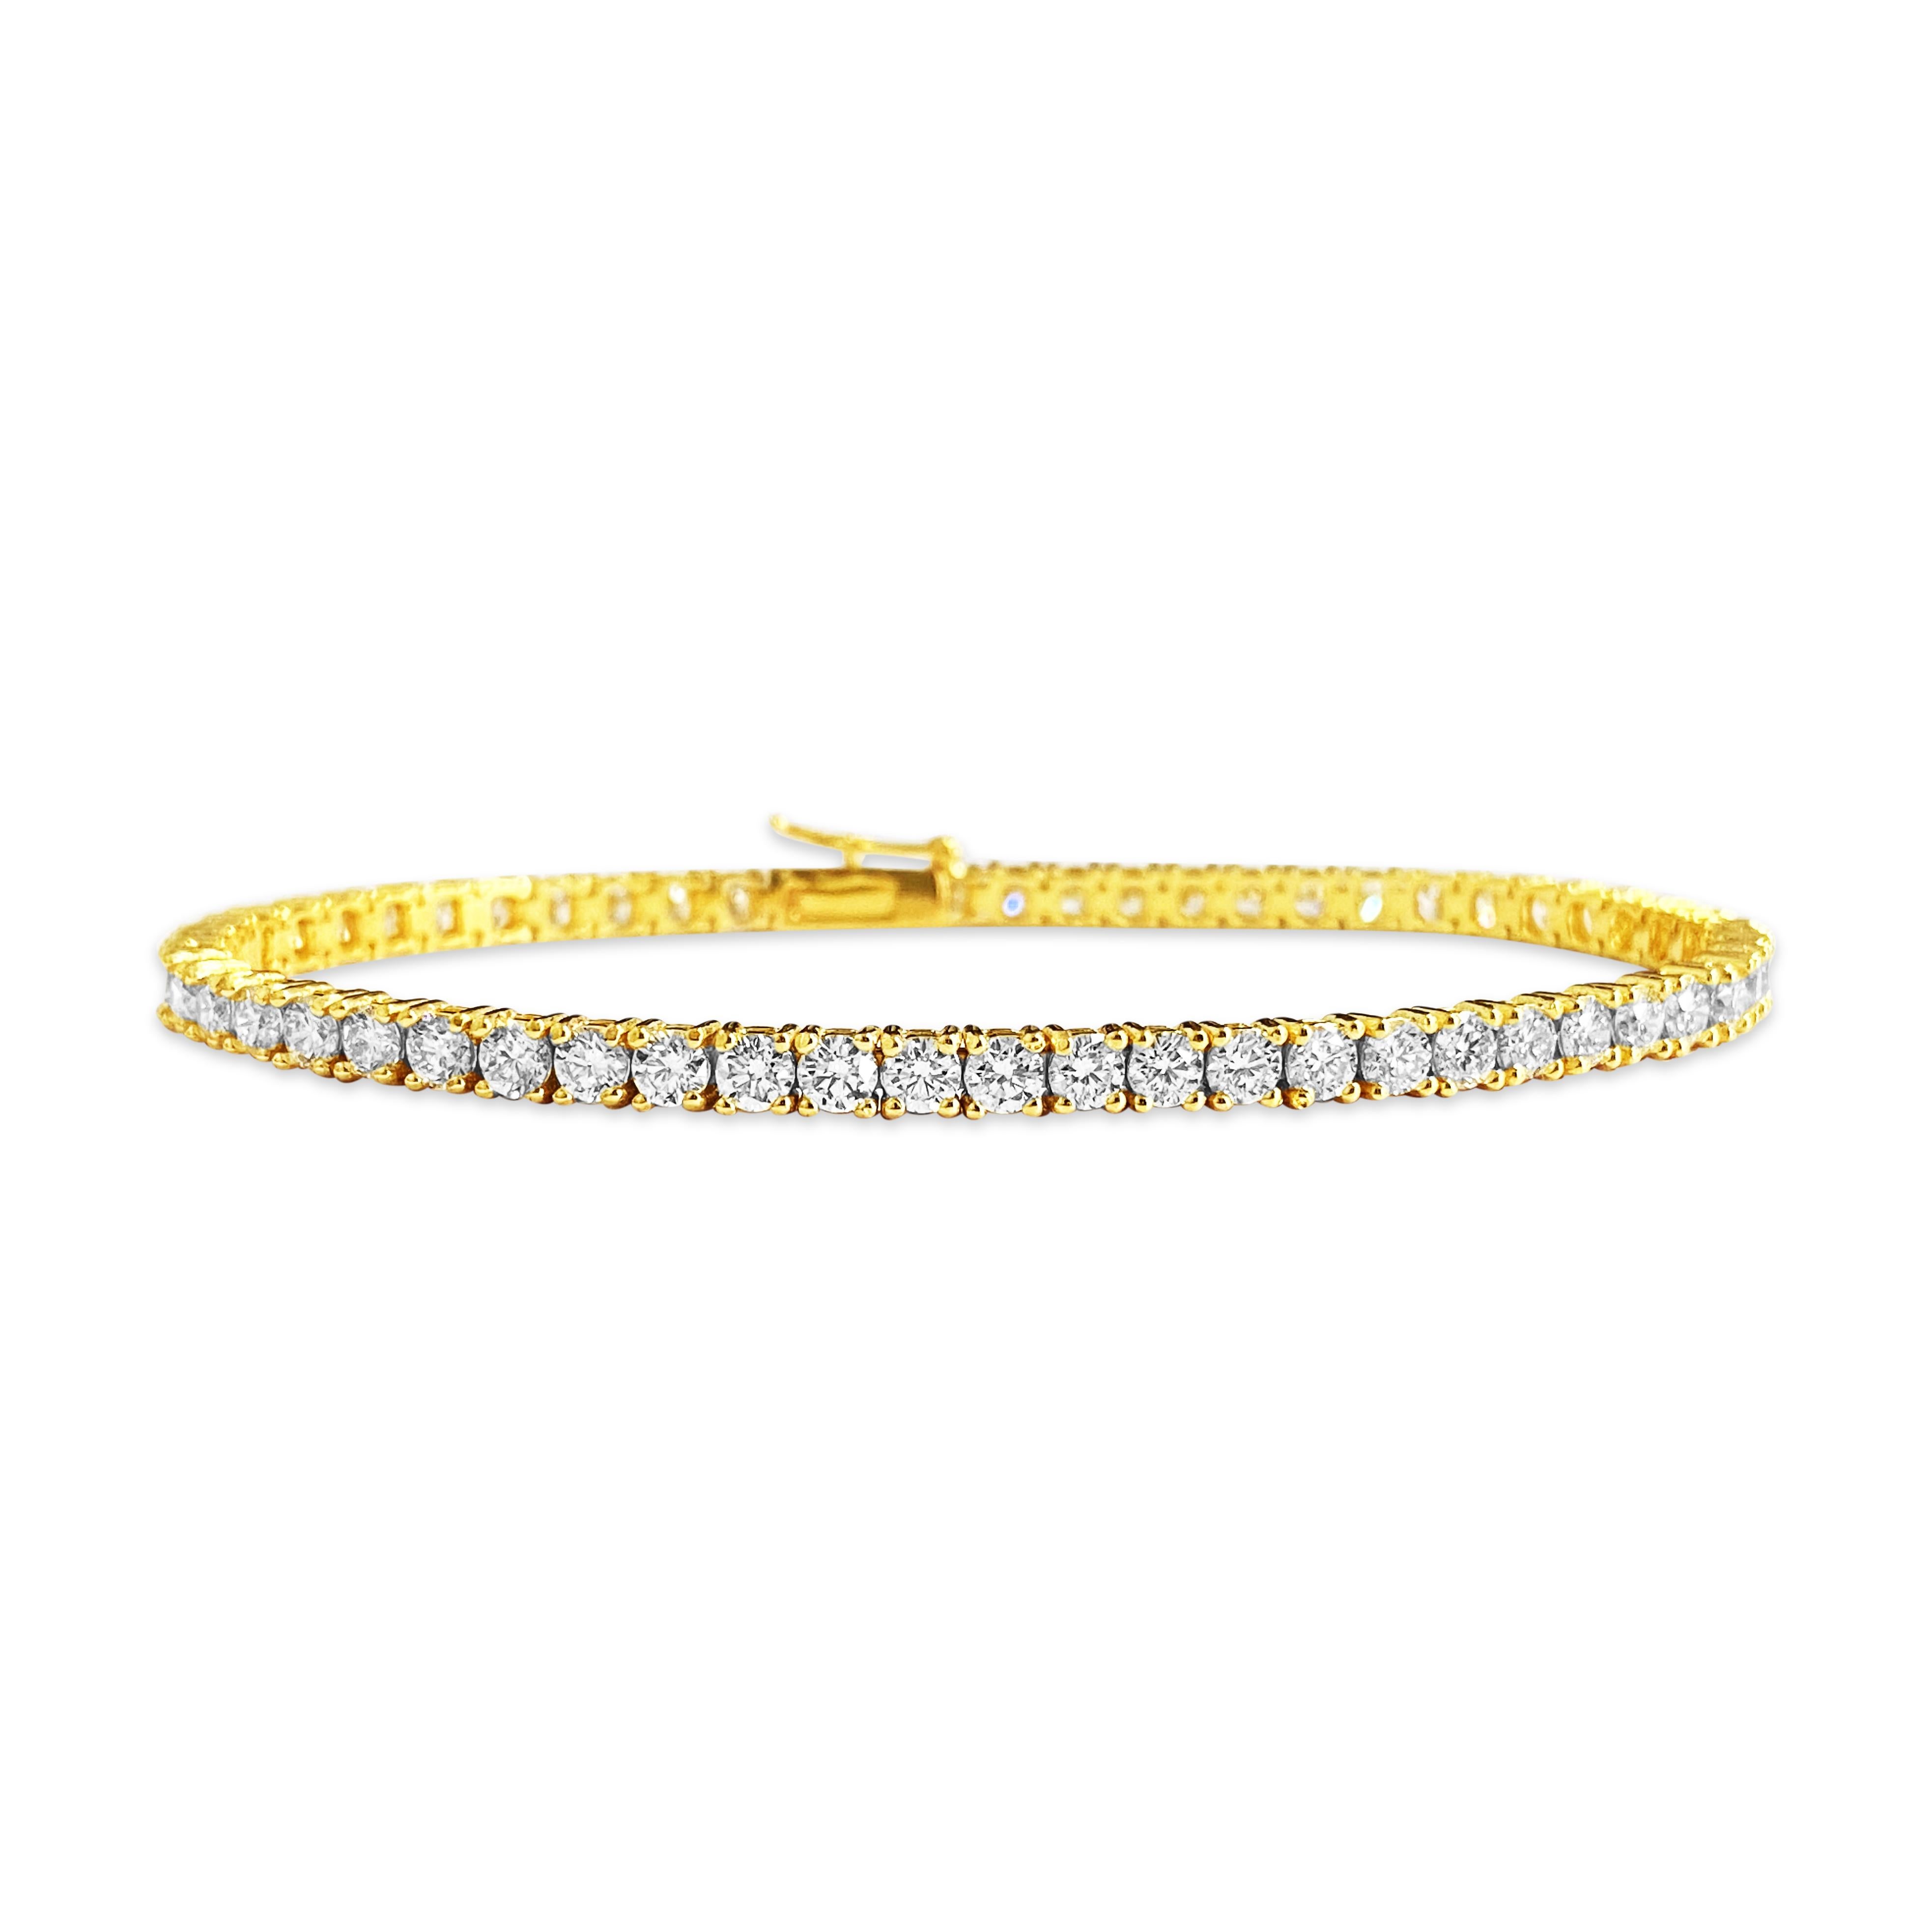 Introducing a brand new unisex diamond tennis bracelet, custom-made with precision from 14k yellow gold, showcasing a total of 5.60 carats of round brilliant-cut diamonds. With VVS clarity and H color, each of the 57 stones radiates premium quality